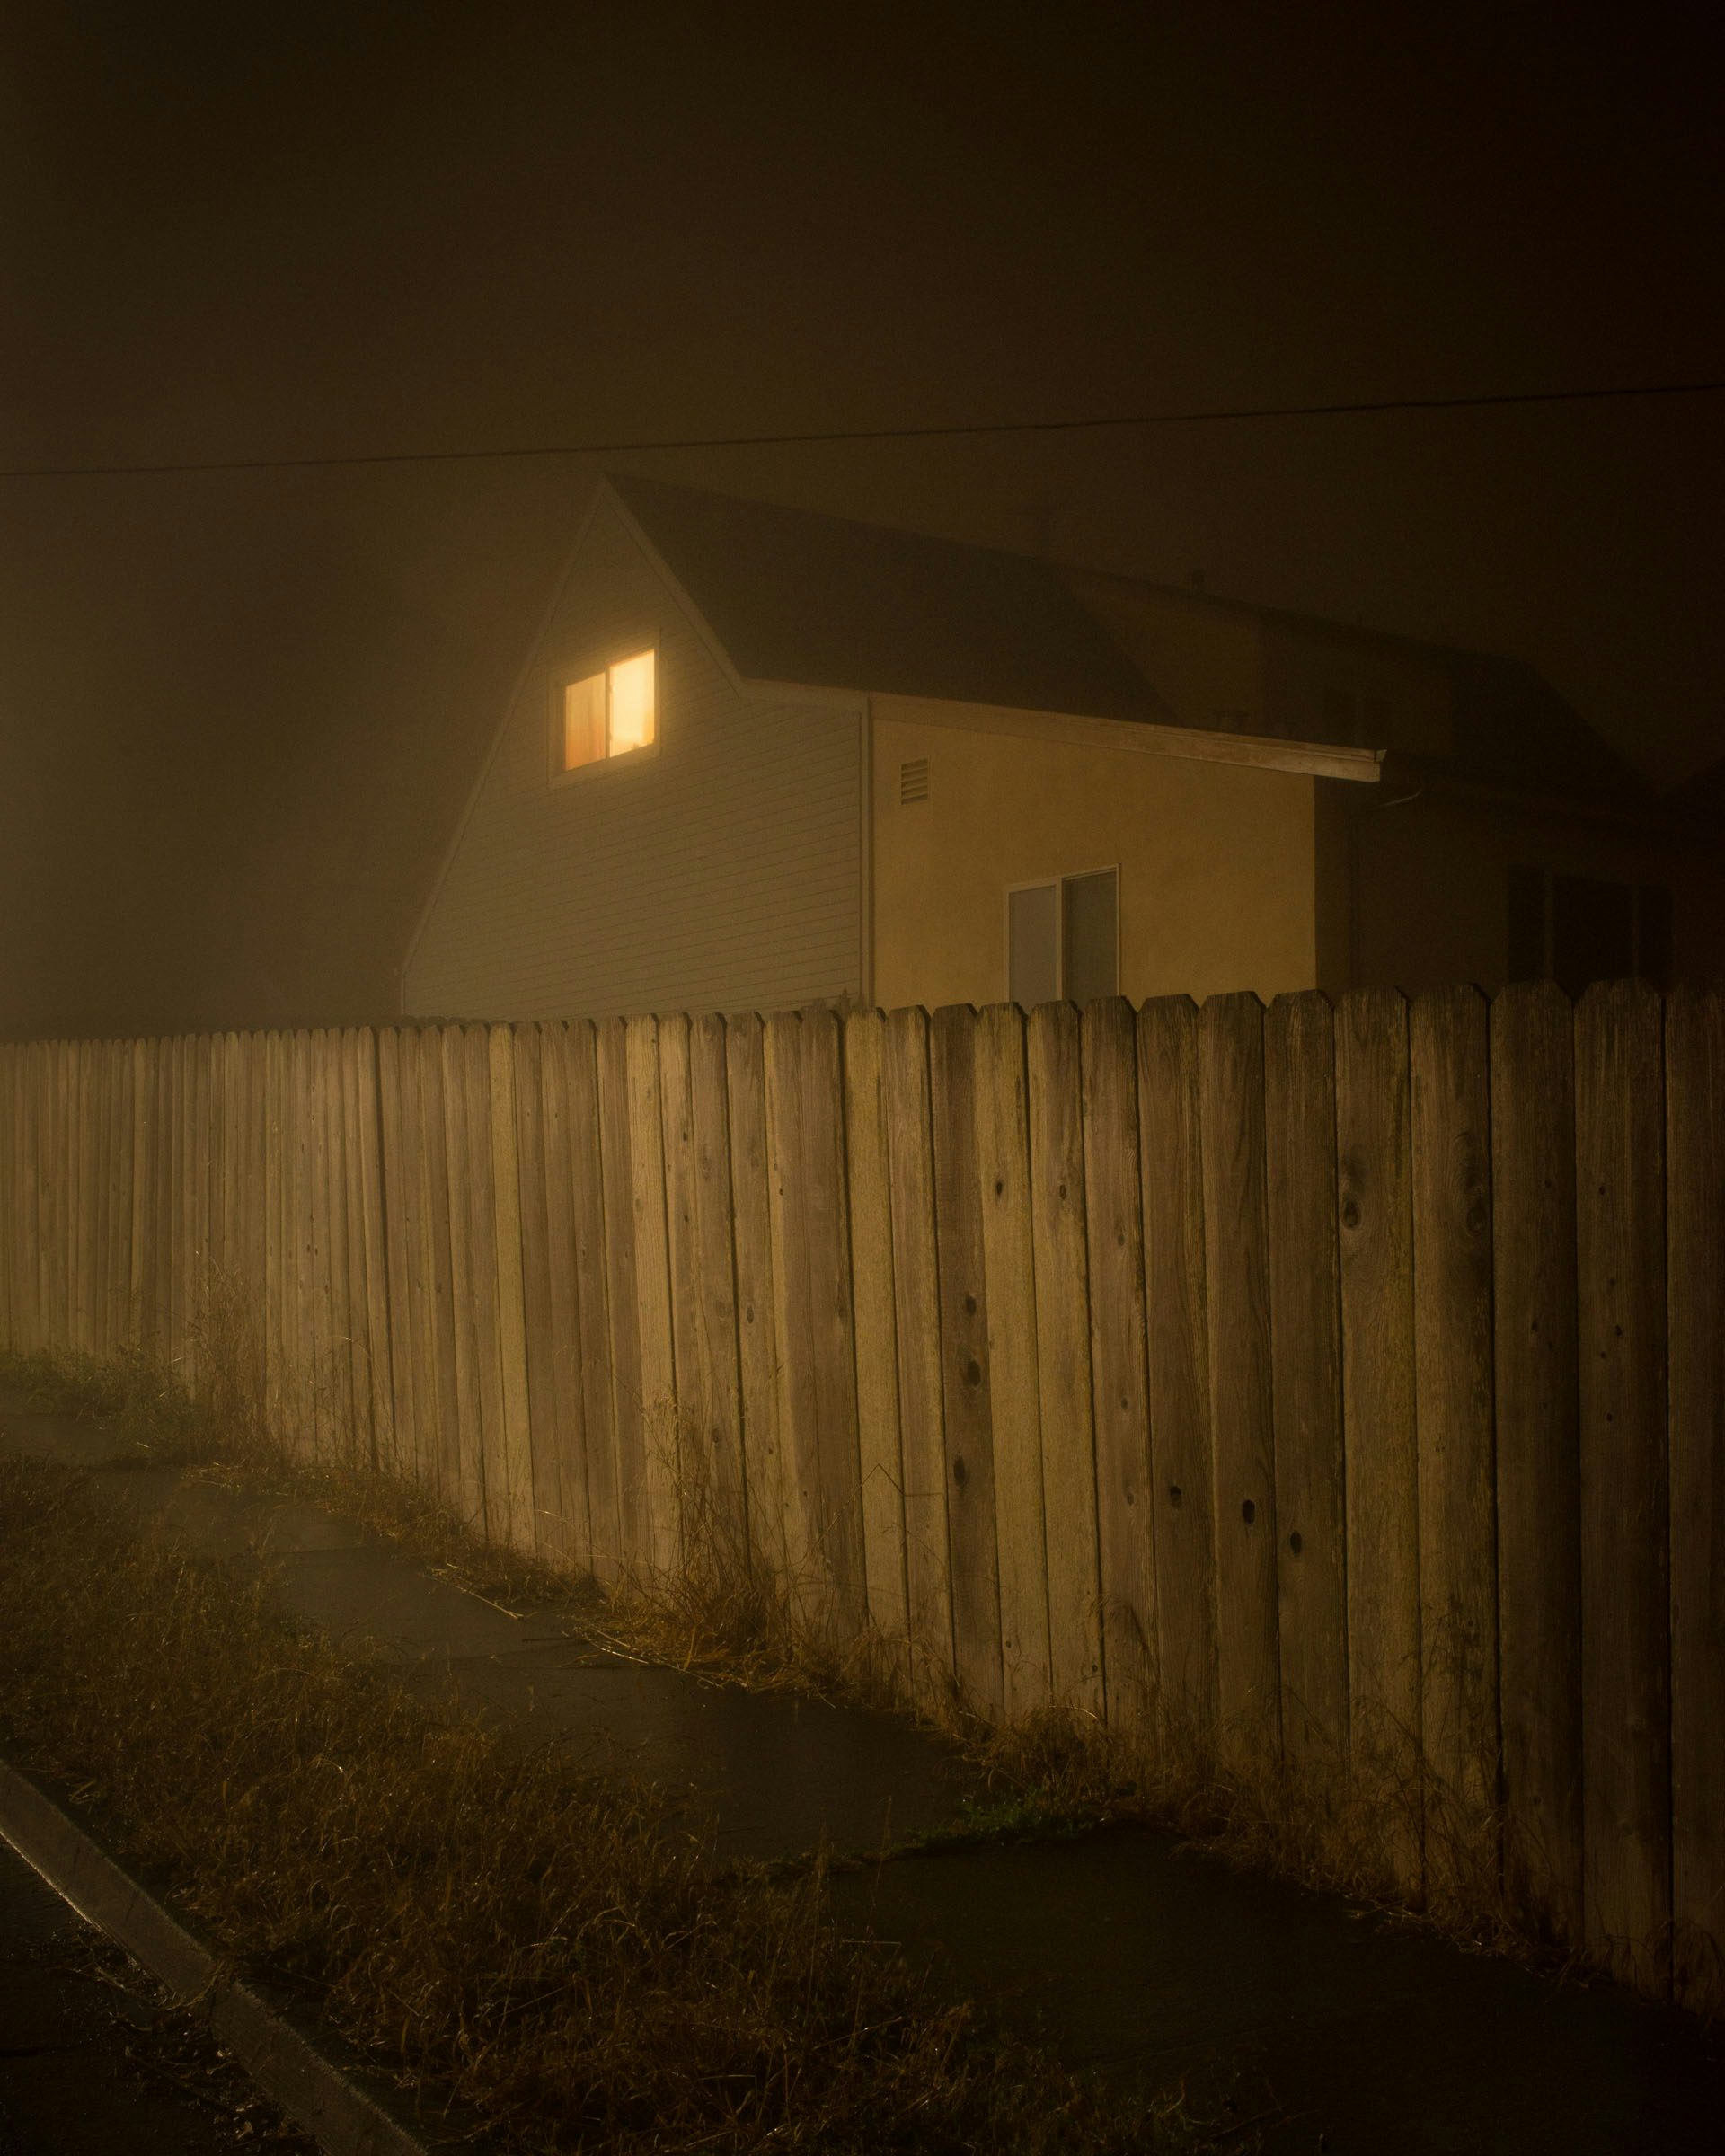 The Black Mechanism #52 by Todd Hido, Obscura Curated Commission.